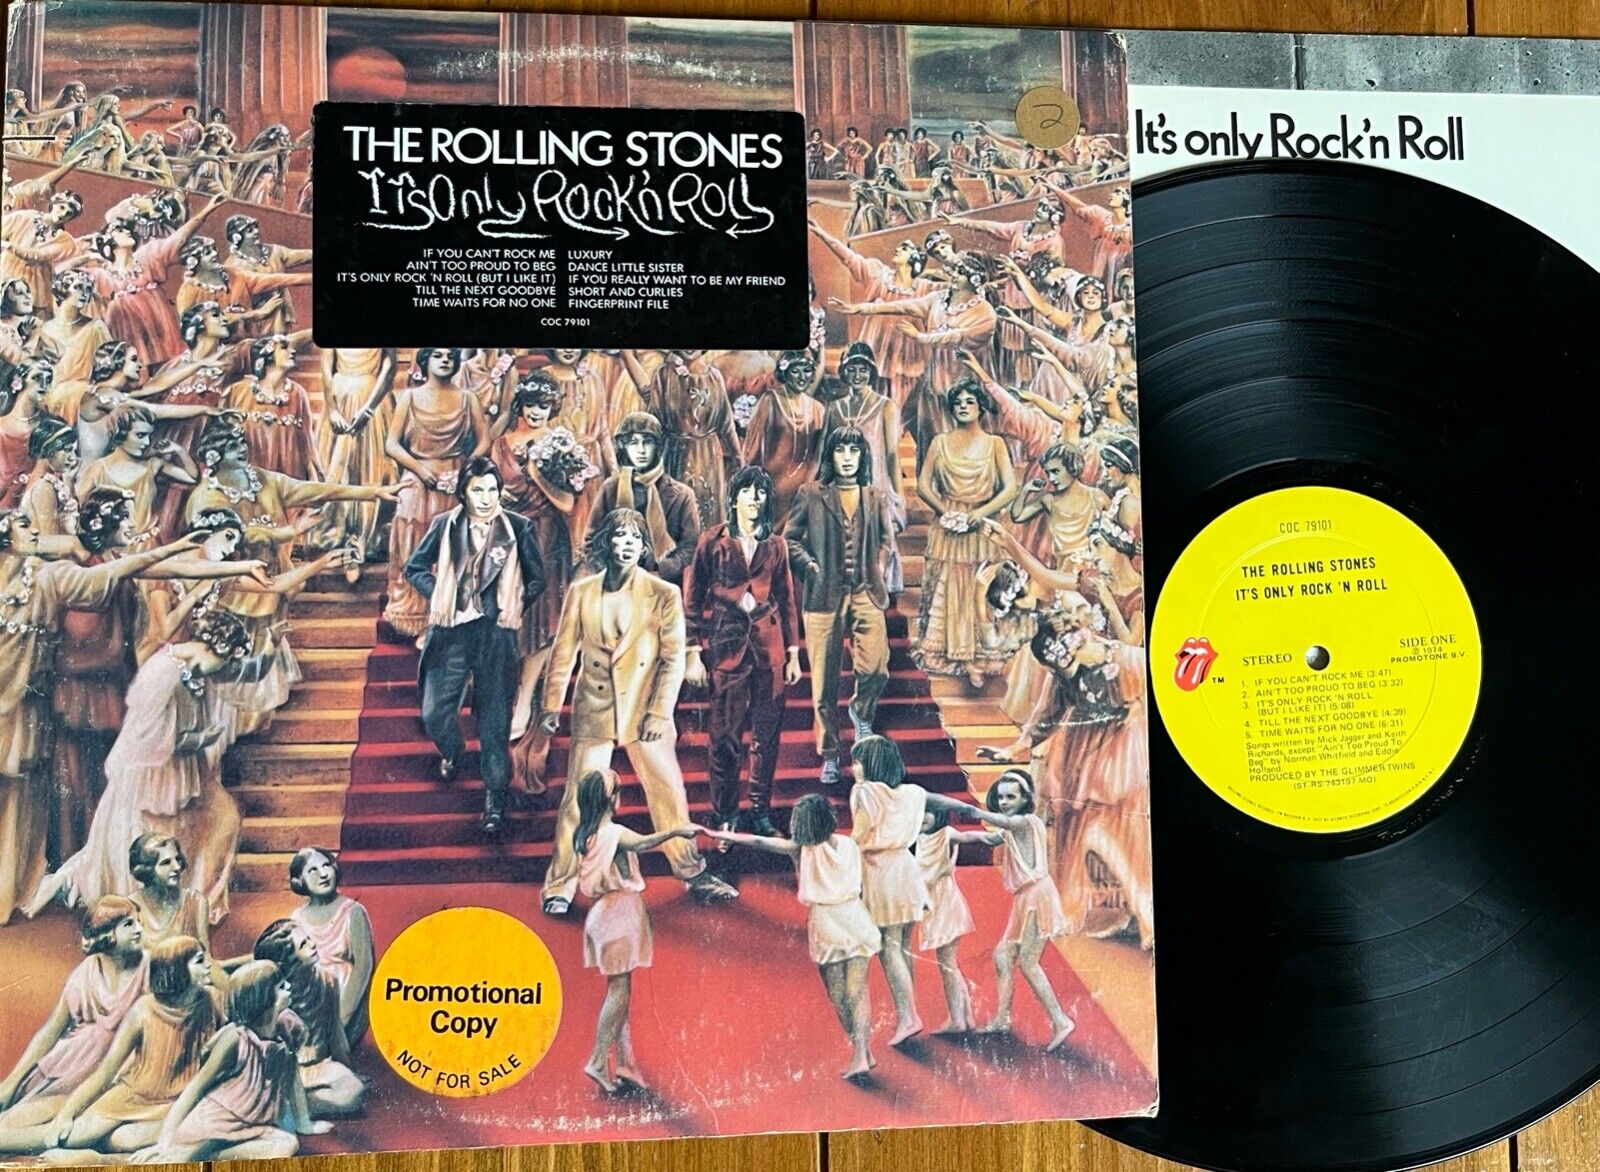 The Rolling Stones - It's Only Roll 'N Roll, Hype and Promo Labels on Cover, LP